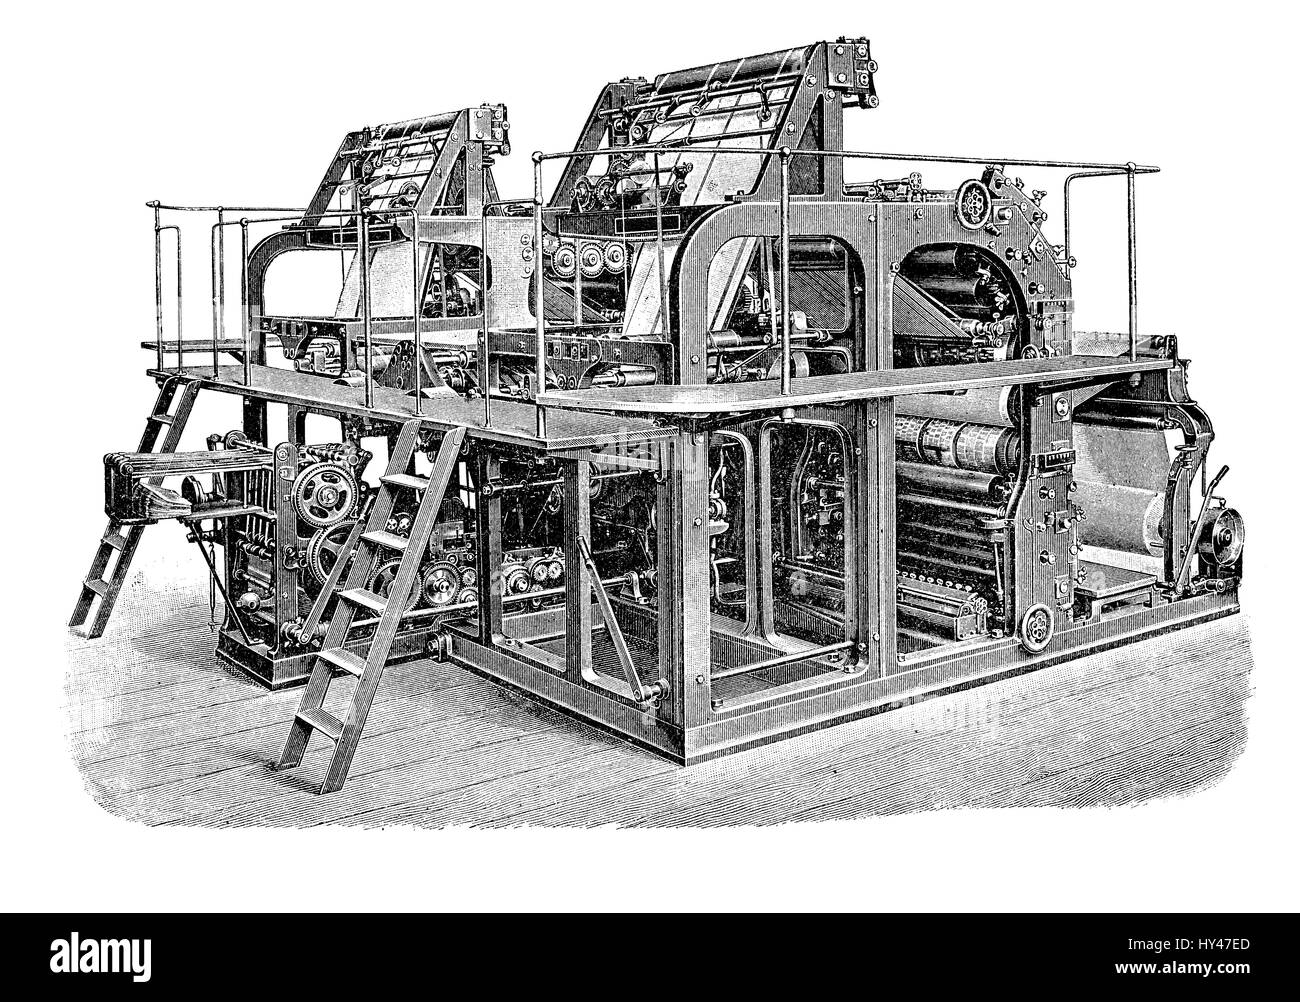 Double high speed rotary printing press for mass production of newspapers and magazines, XIX century engraving Stock Photo